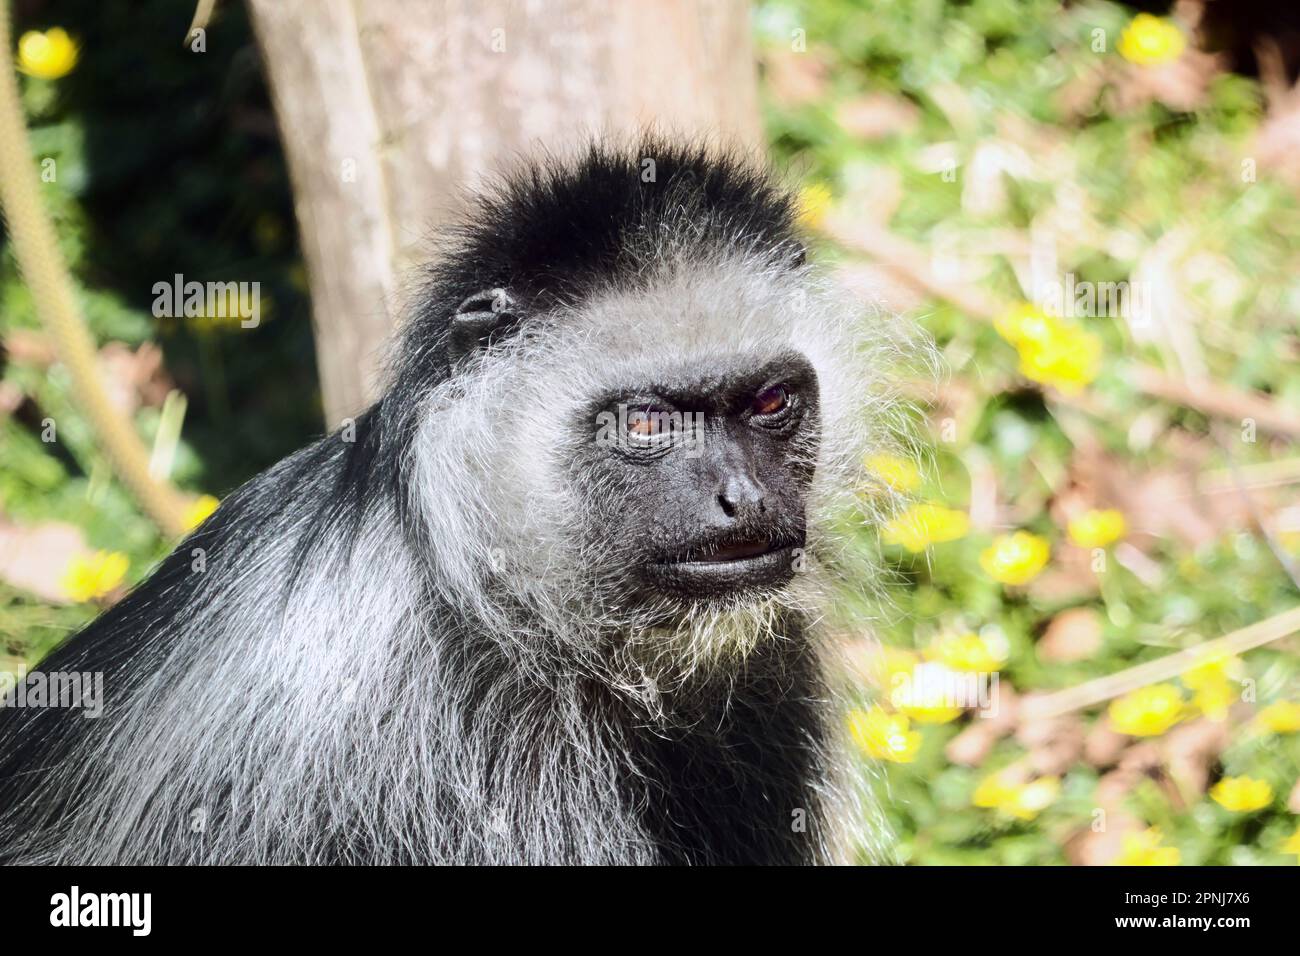 Endangered King Colobus from west Africa. Stock Photo